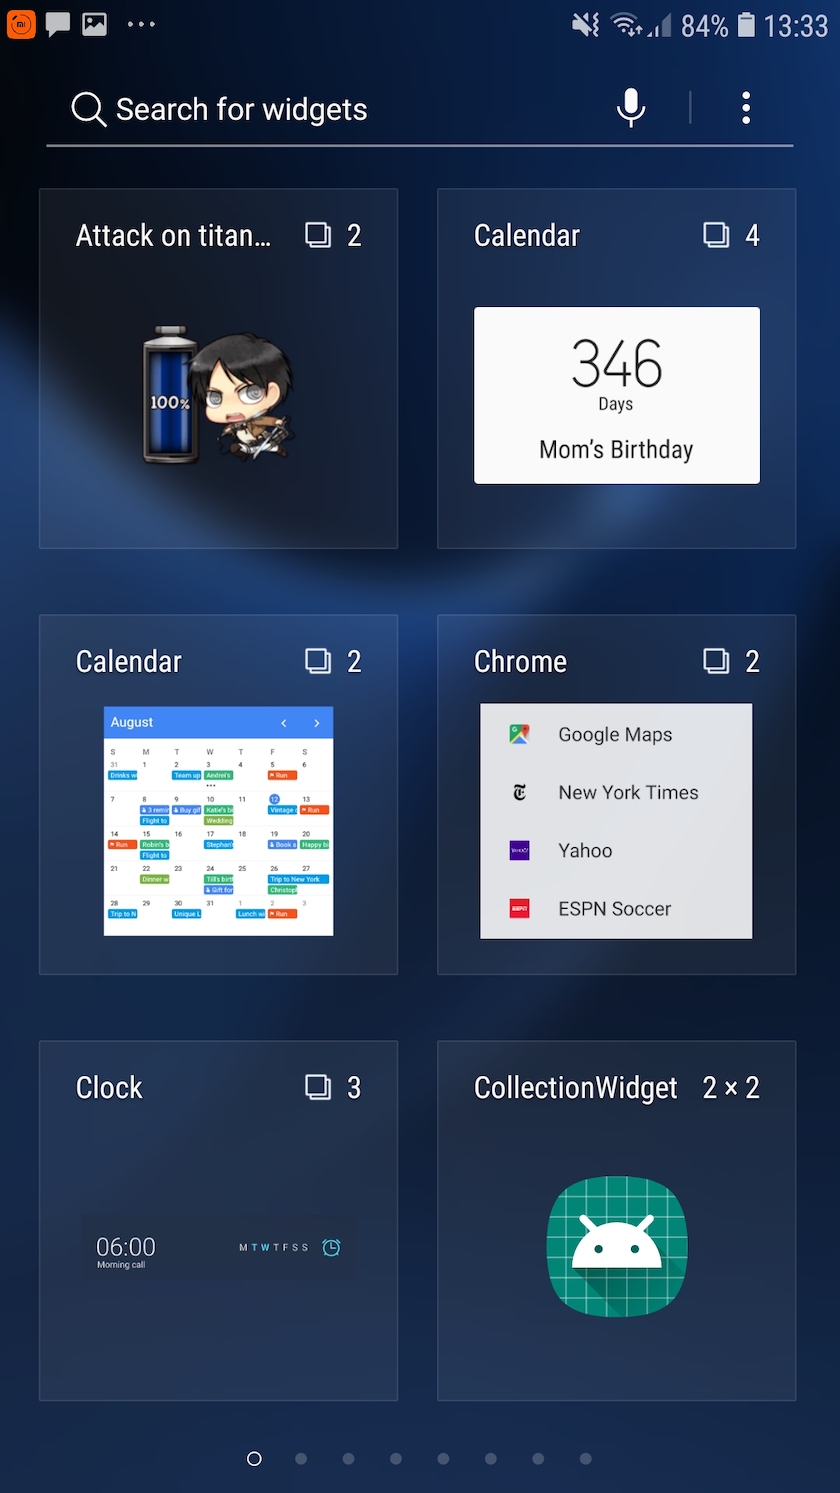 Users can choose a widget from Android's Widget Picker.